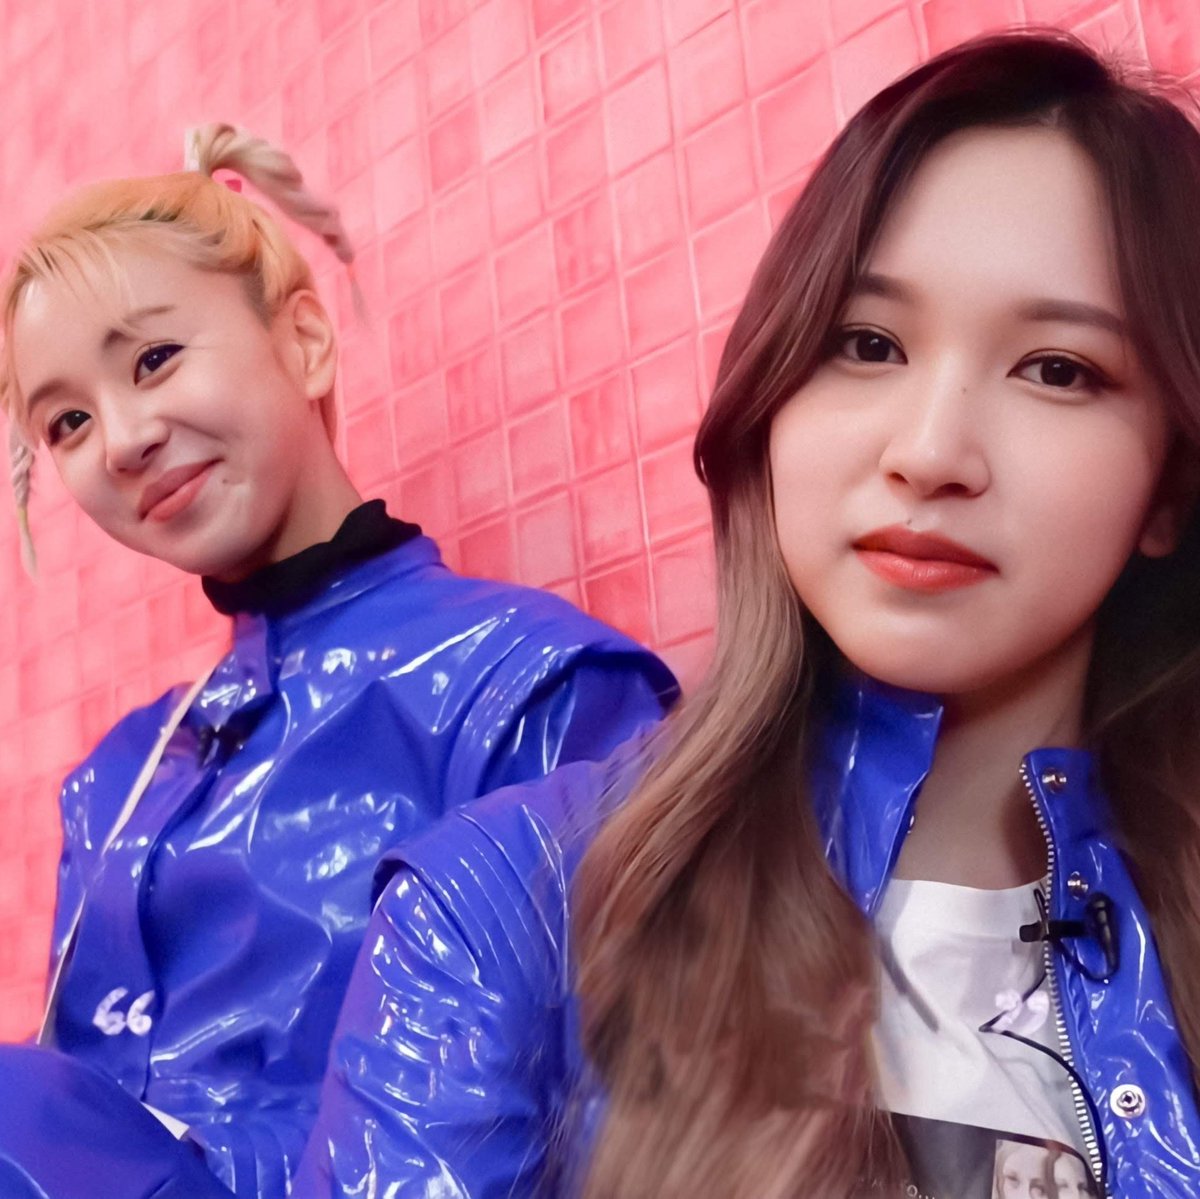 RT @LegendaryShips: MiChaeng ( Mina and Chaeyoung of TWICE ) https://t.co/MbK2OOJTwq